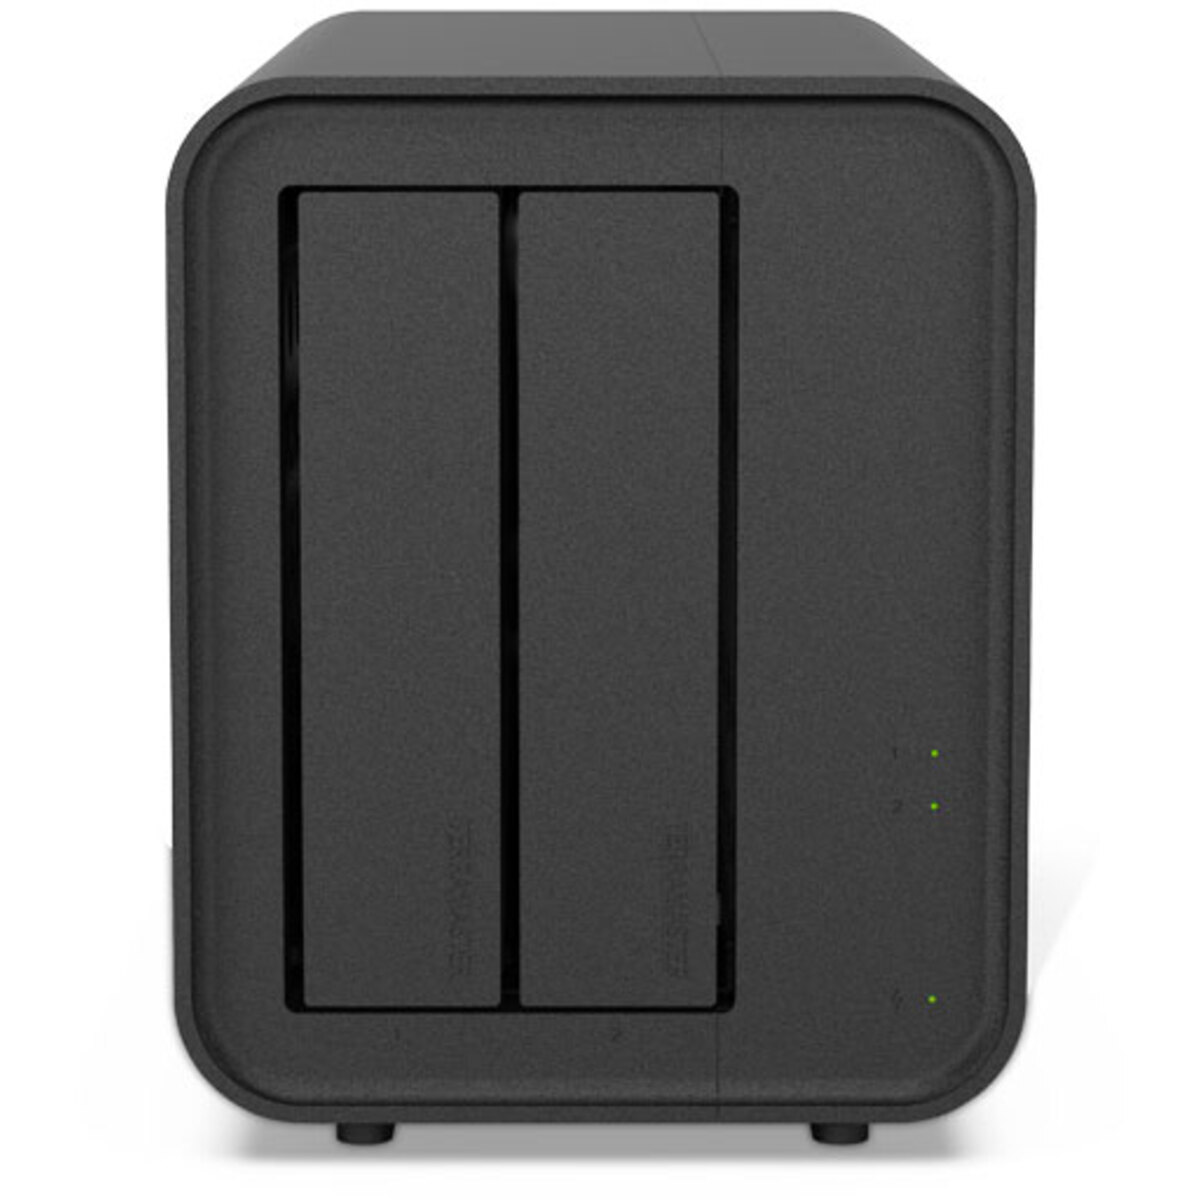 TerraMaster F2-424 48tb 2-Bay Desktop Multimedia / Power User / Business NAS - Network Attached Storage Device 2x24tb Seagate IronWolf Pro ST24000NT002 3.5 7200rpm SATA 6Gb/s HDD NAS Class Drives Installed - Burn-In Tested F2-424